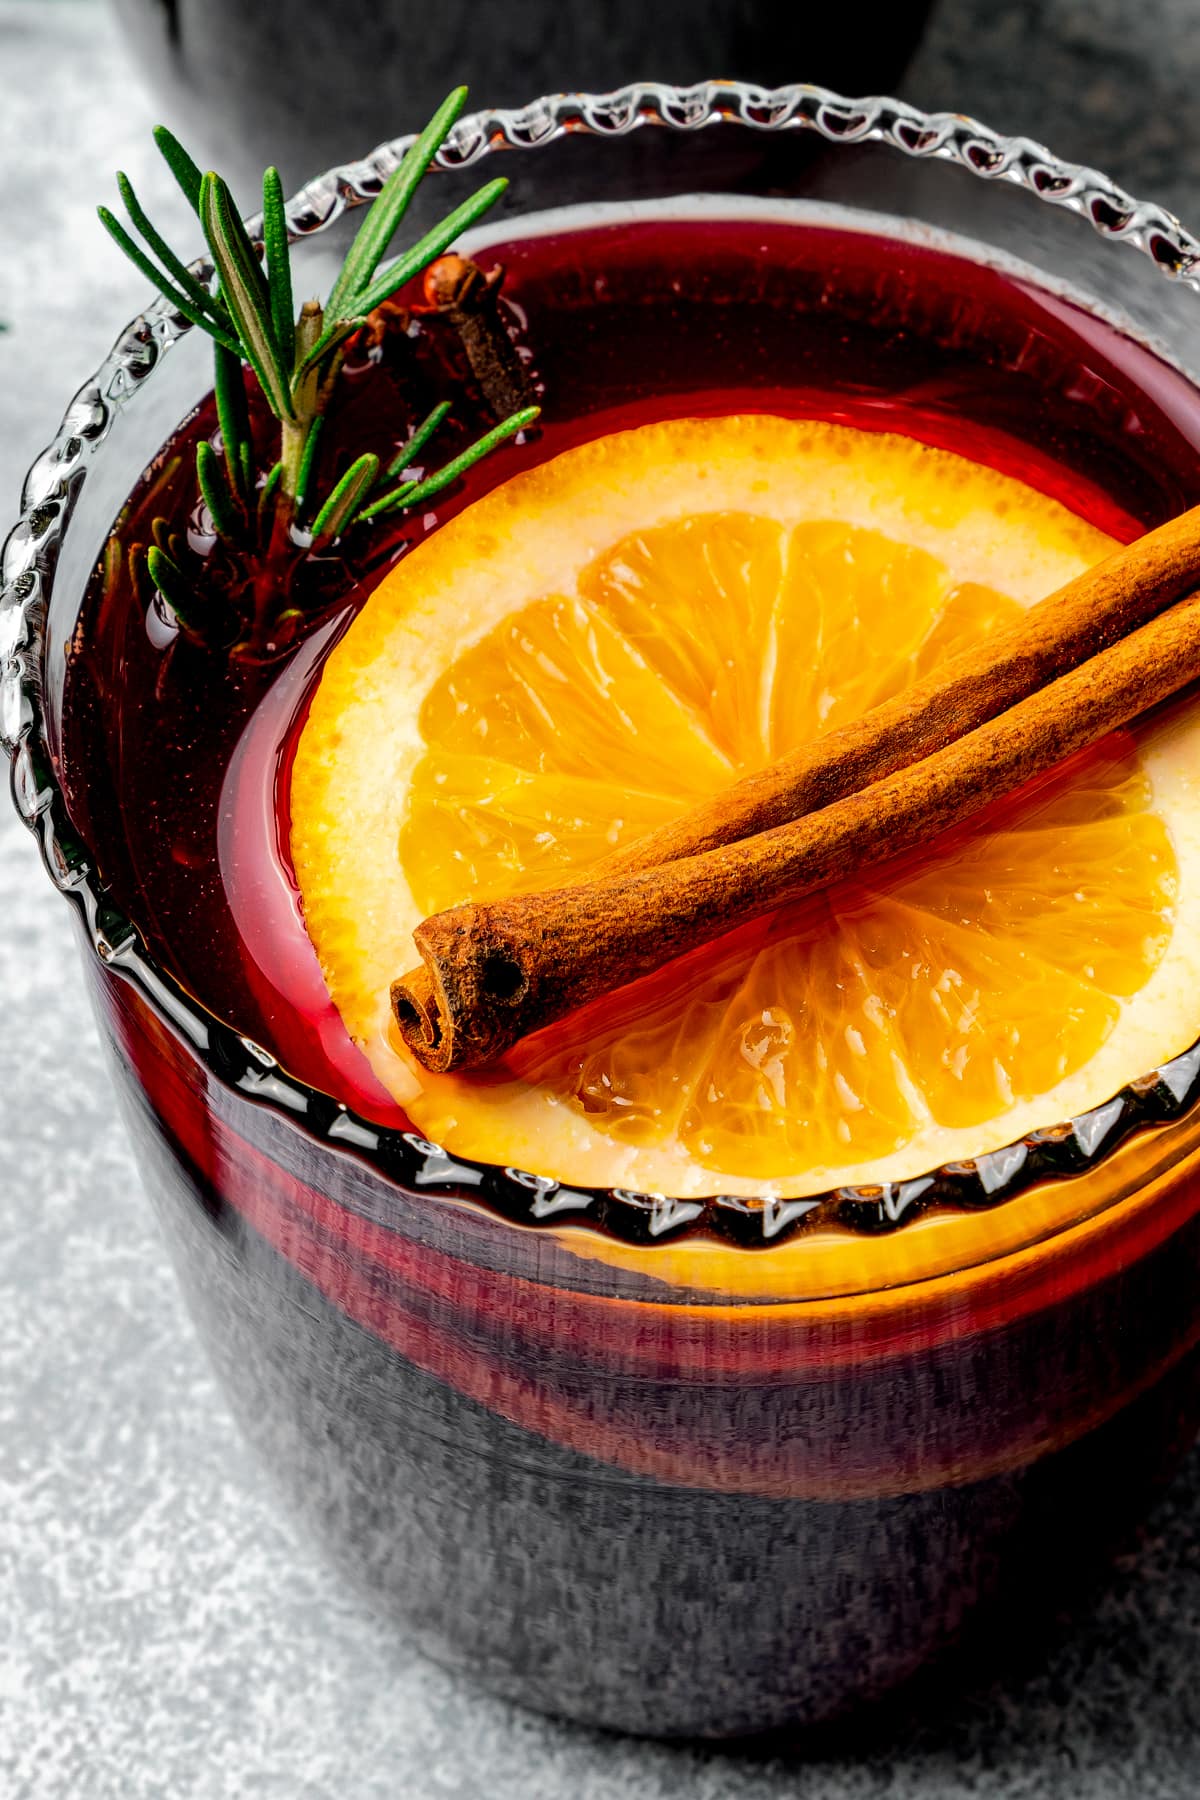 Close-up image of Mulled wine served in a glass garnished with an orange slice and a cinnamon stick.